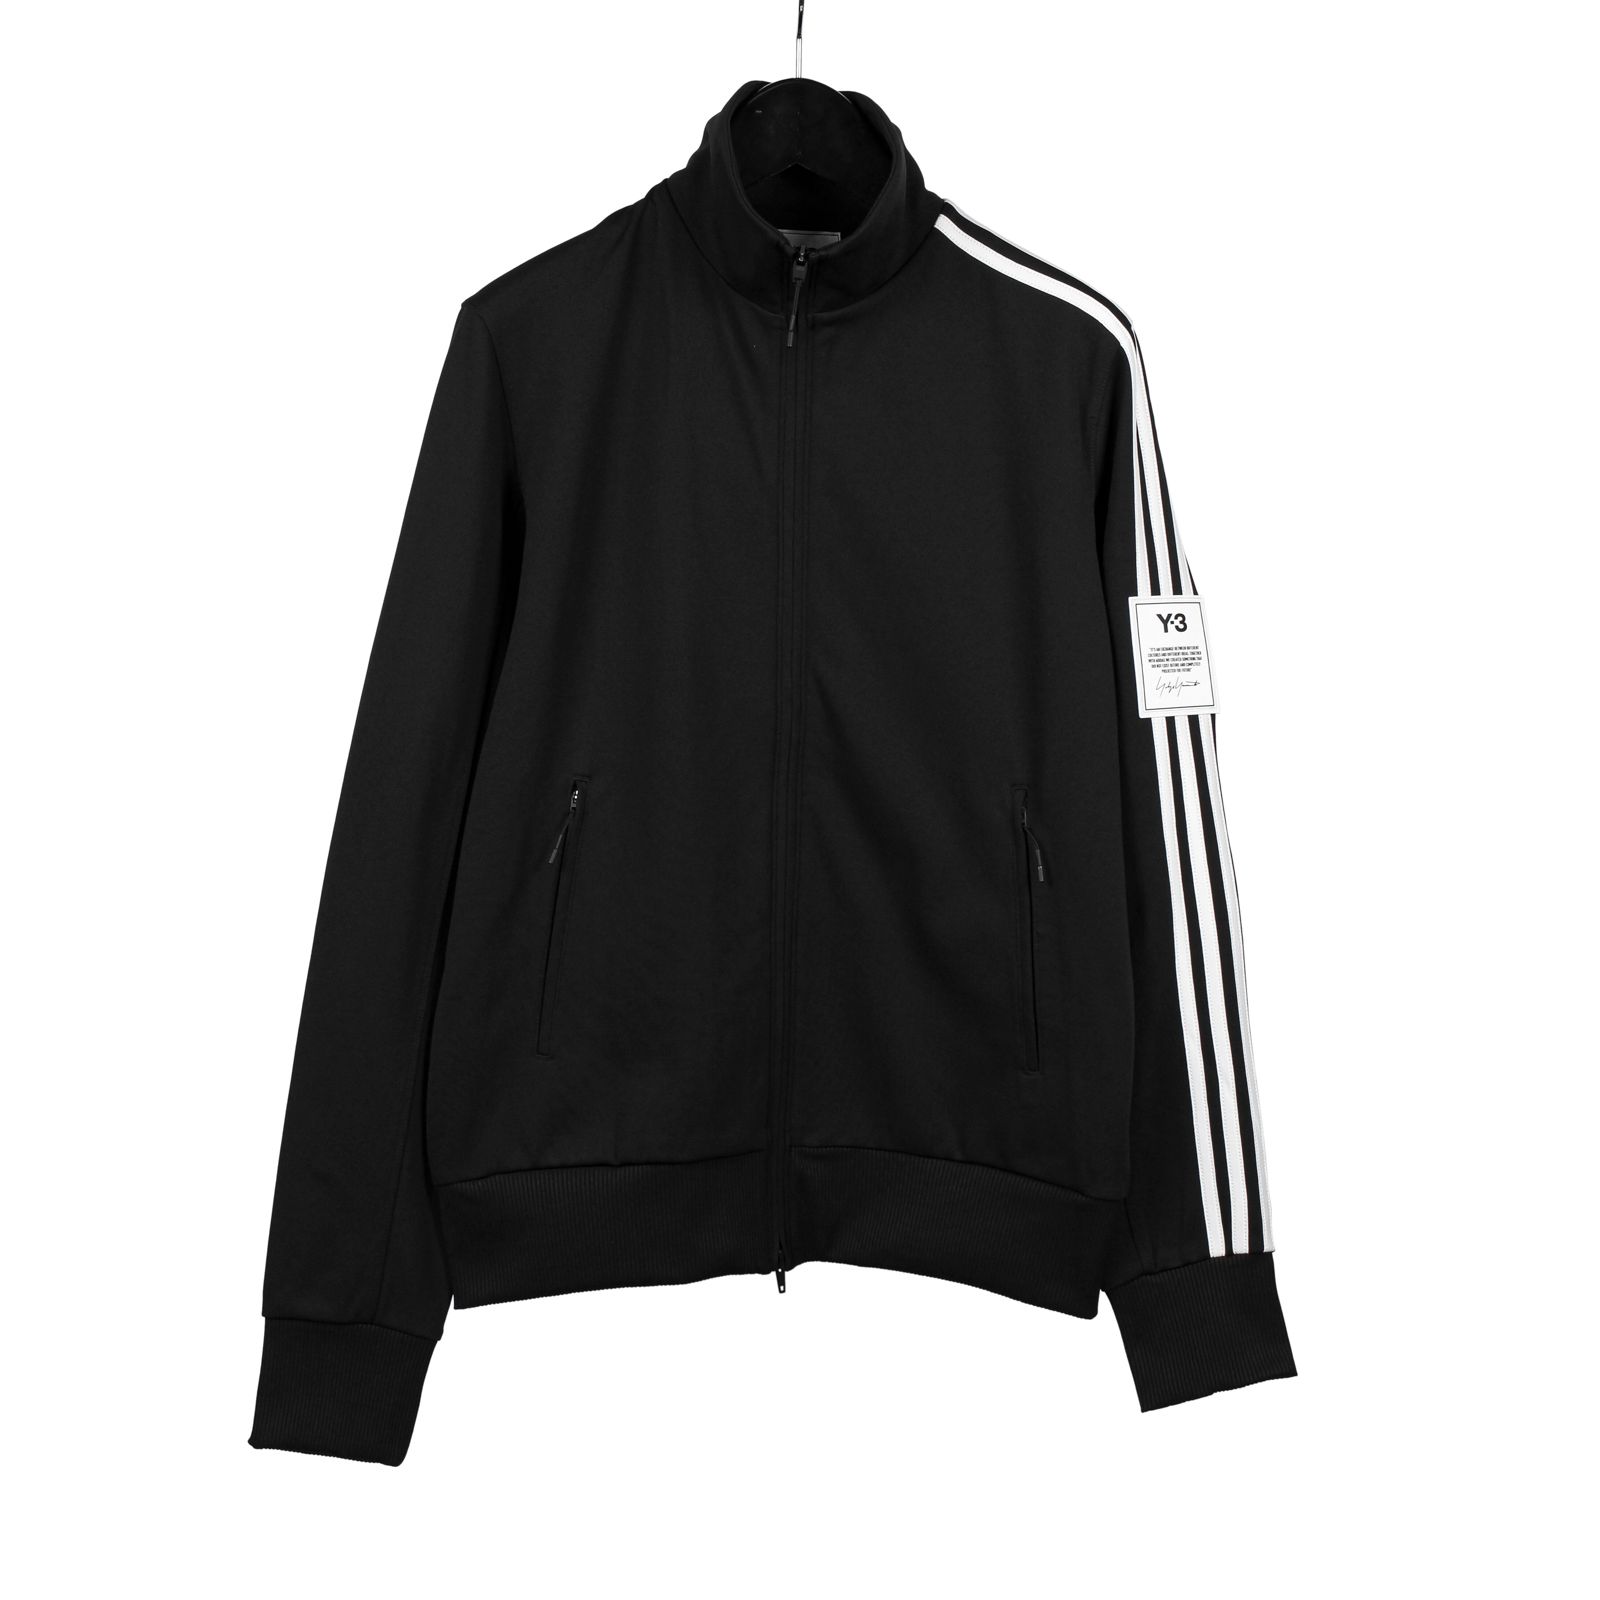 Y-3 - M 3 STP TRACK JACKET / H16347-ACCS21 | ALUBUS / RUFUS